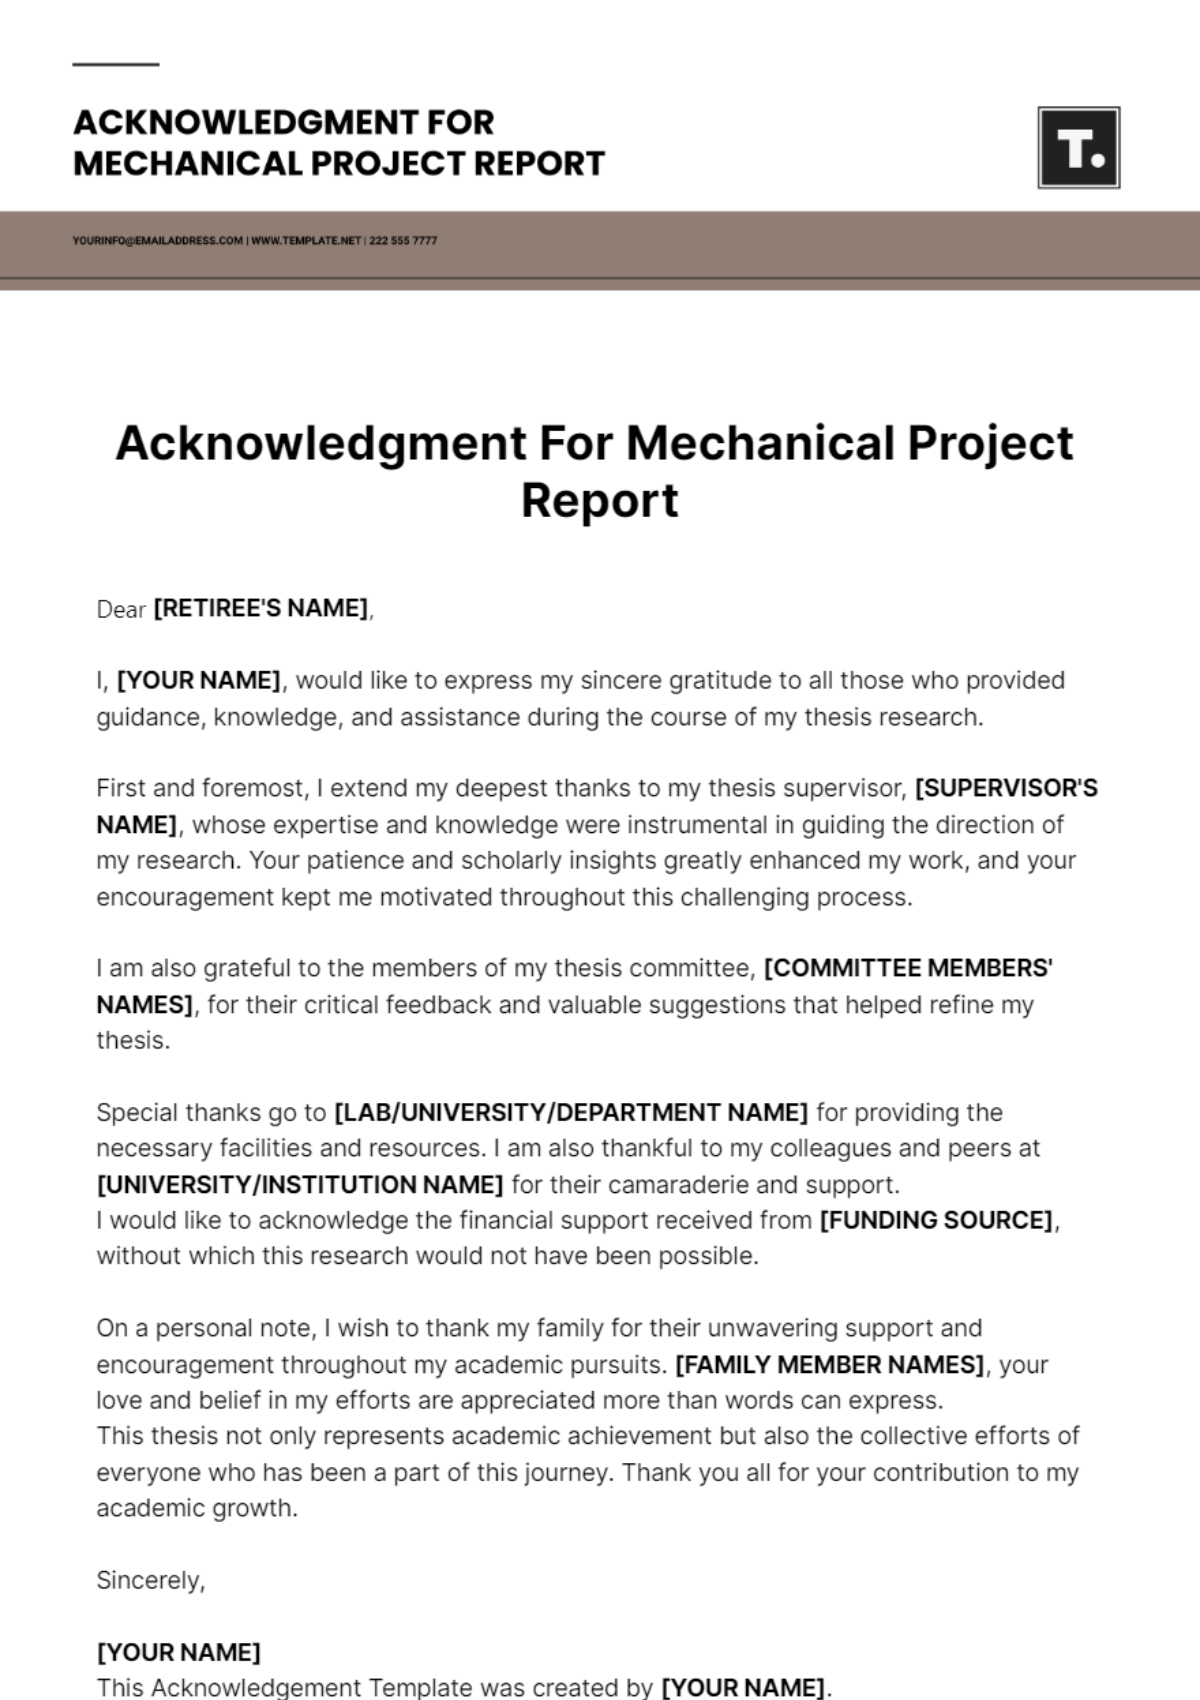 Acknowledgment For Mechanical Project Report Template